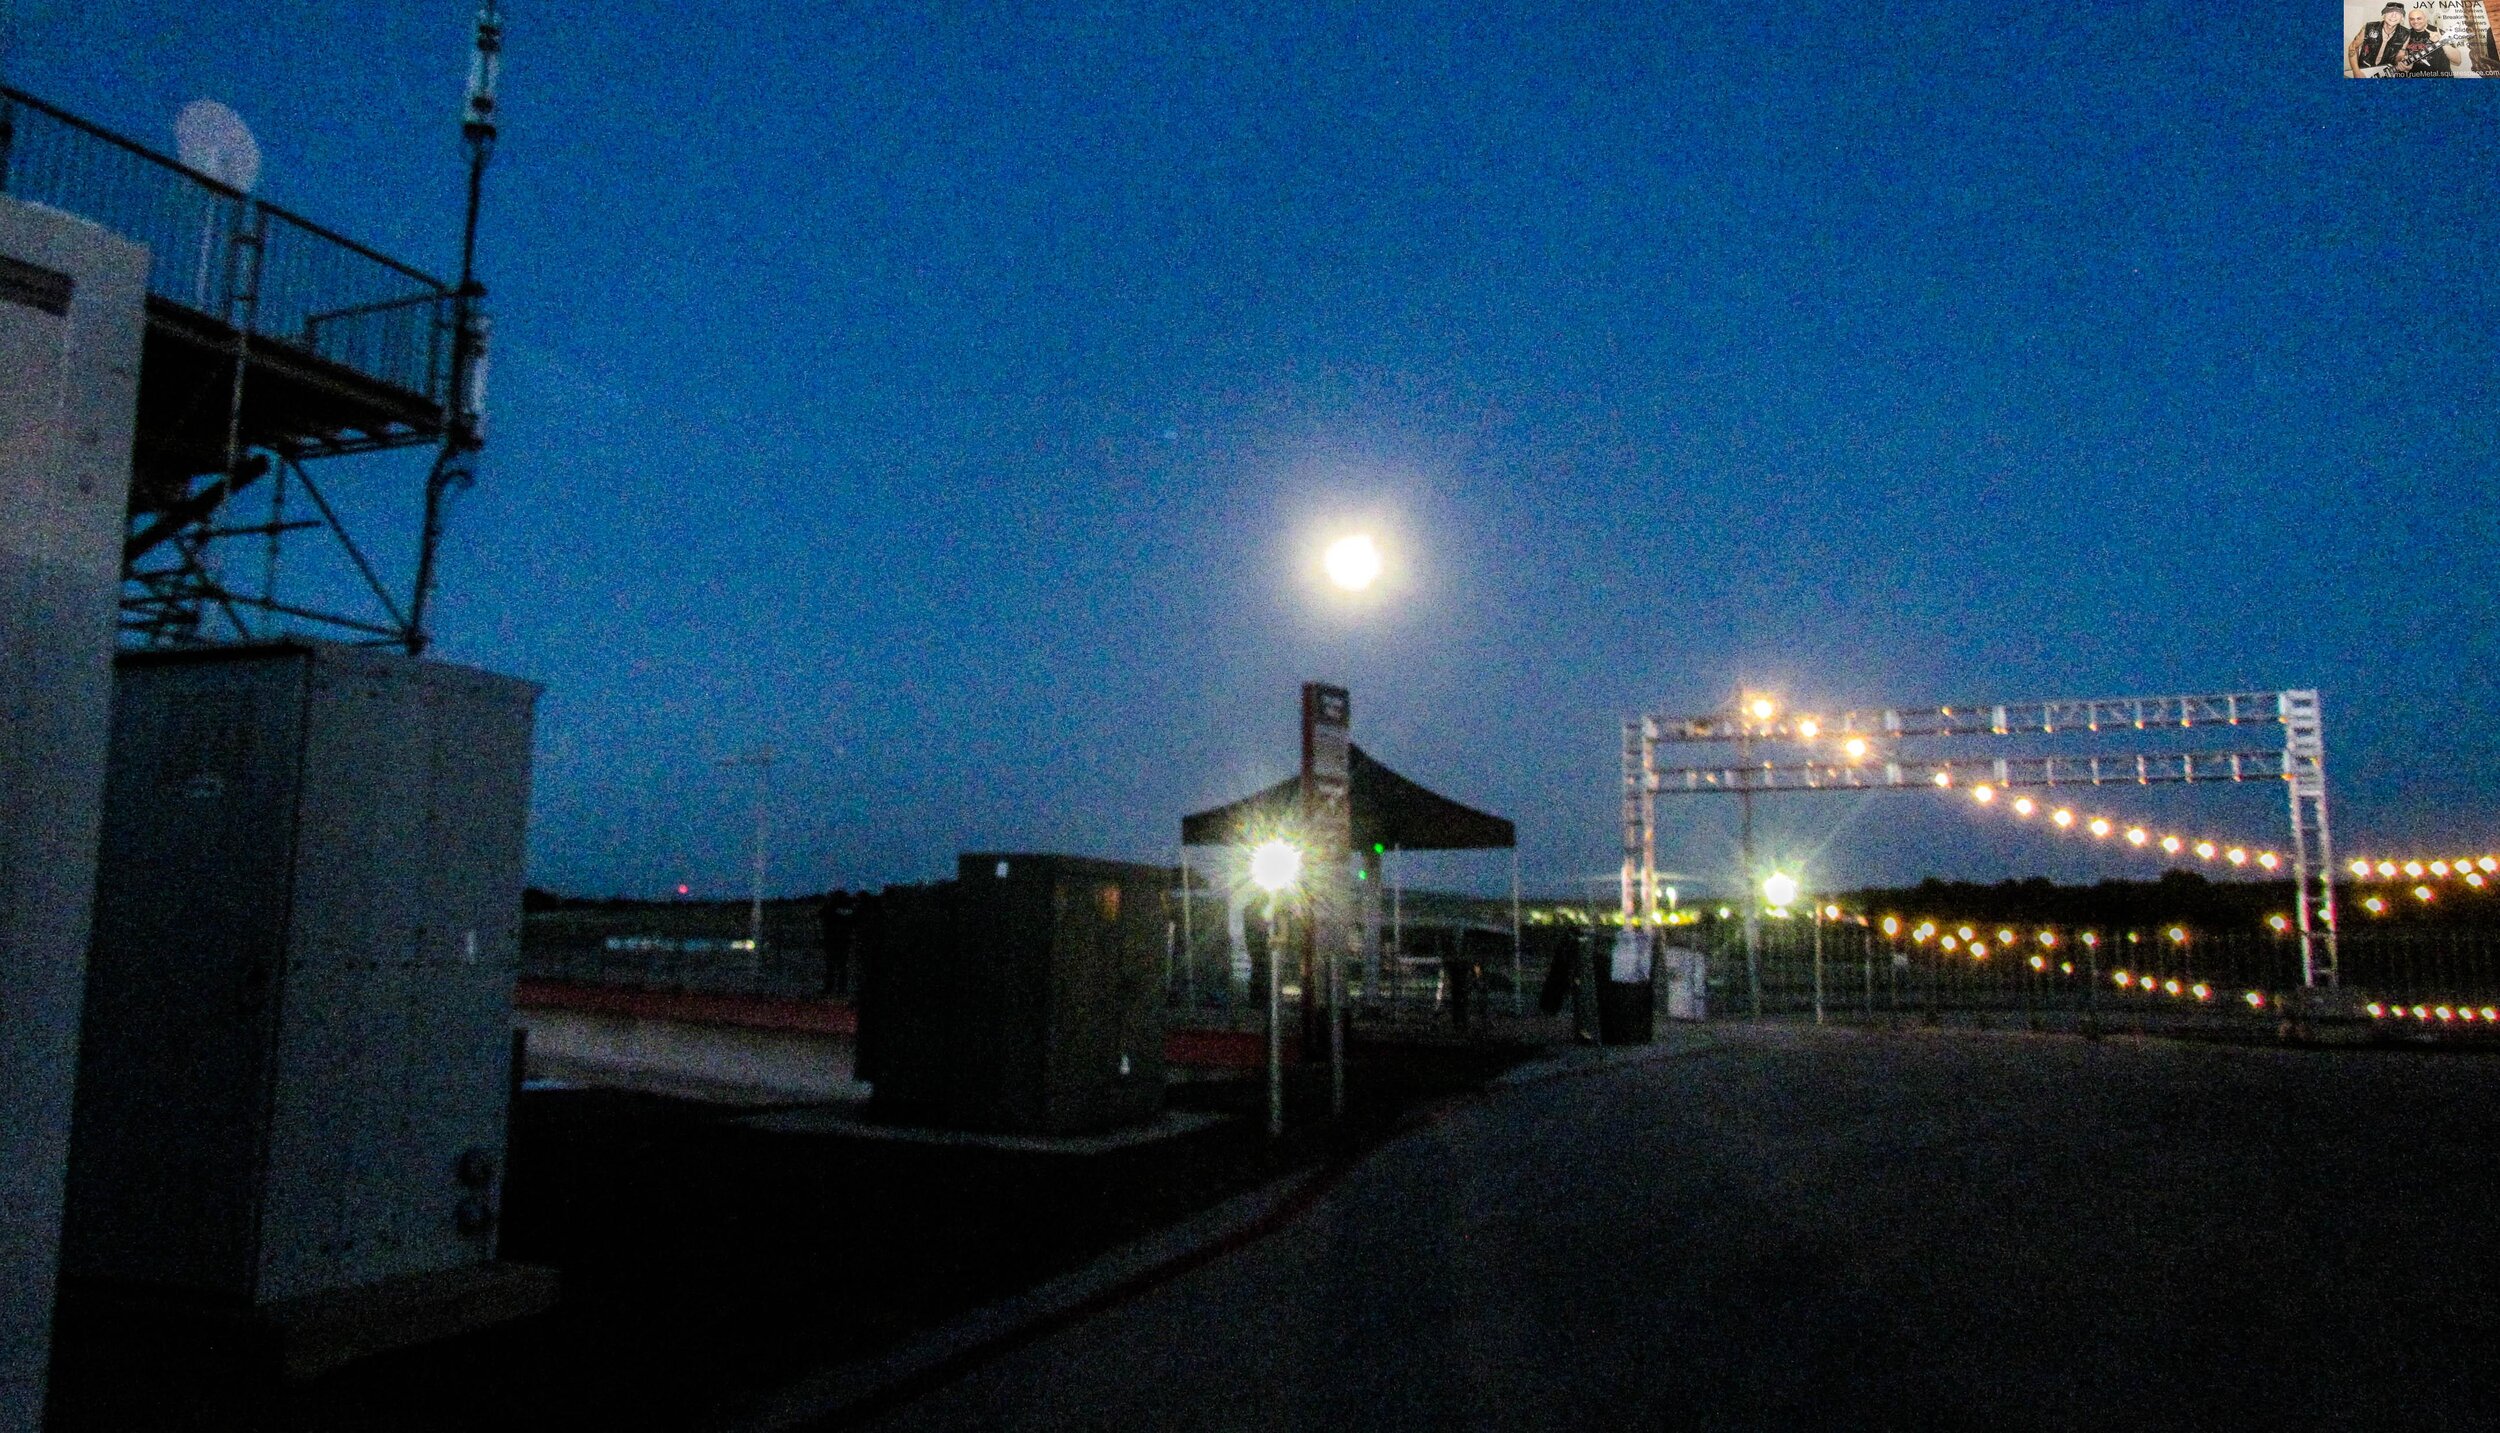  A crystal clear moonlit night permeates the sky at the Germania Insurance Amphitheater and racetrack. 